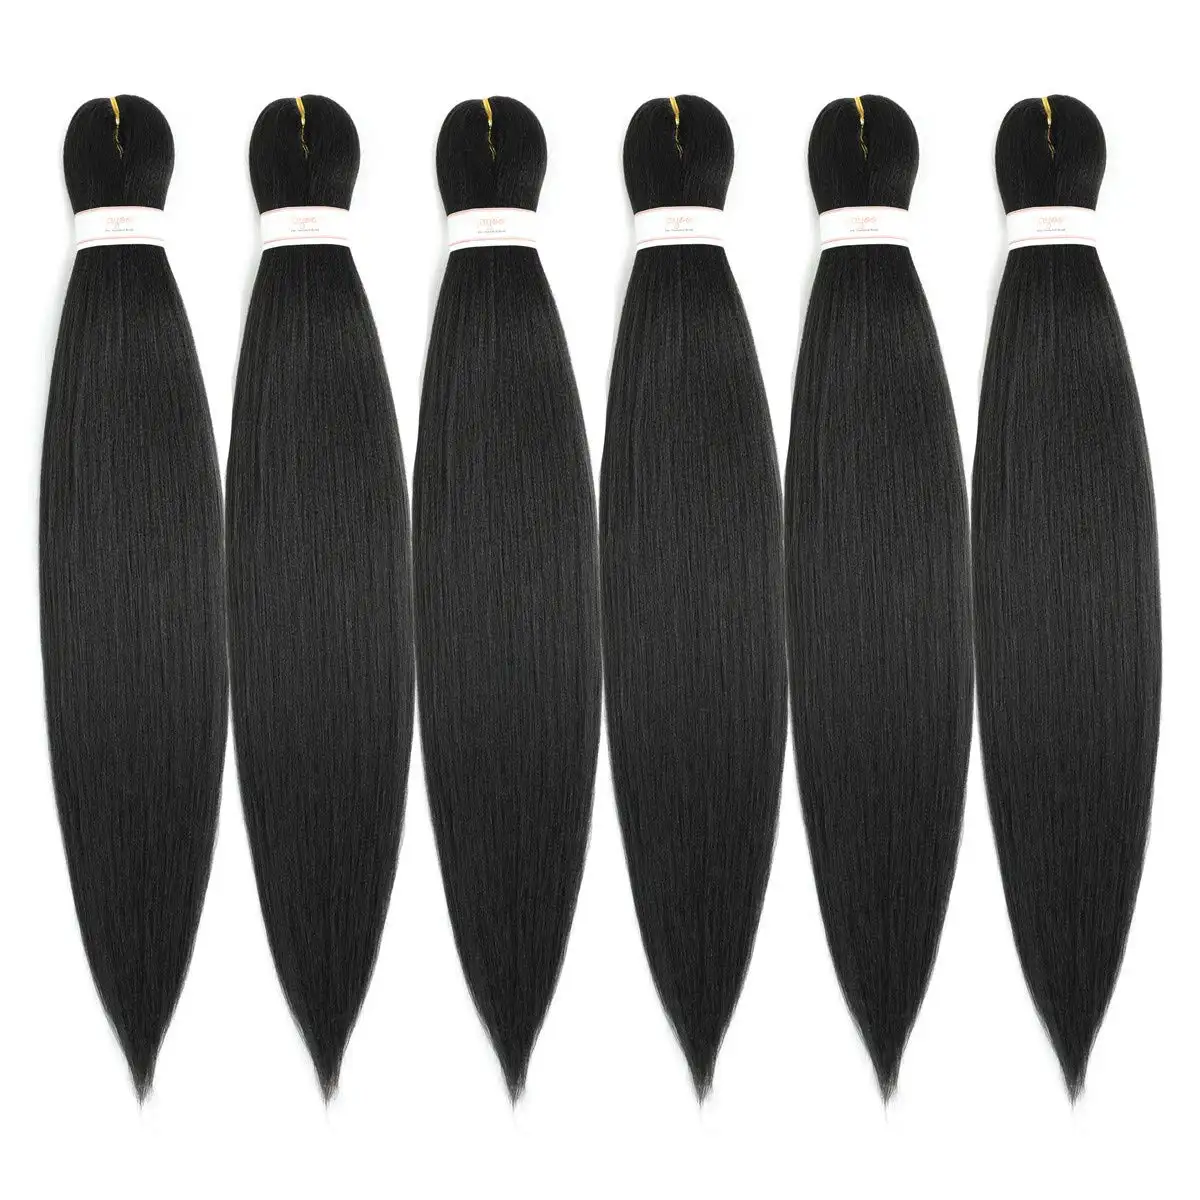 Wholesale Ombre Color Synthetic Jumbo ez braid bulk yaki private label pre stretched braiding hair extensions